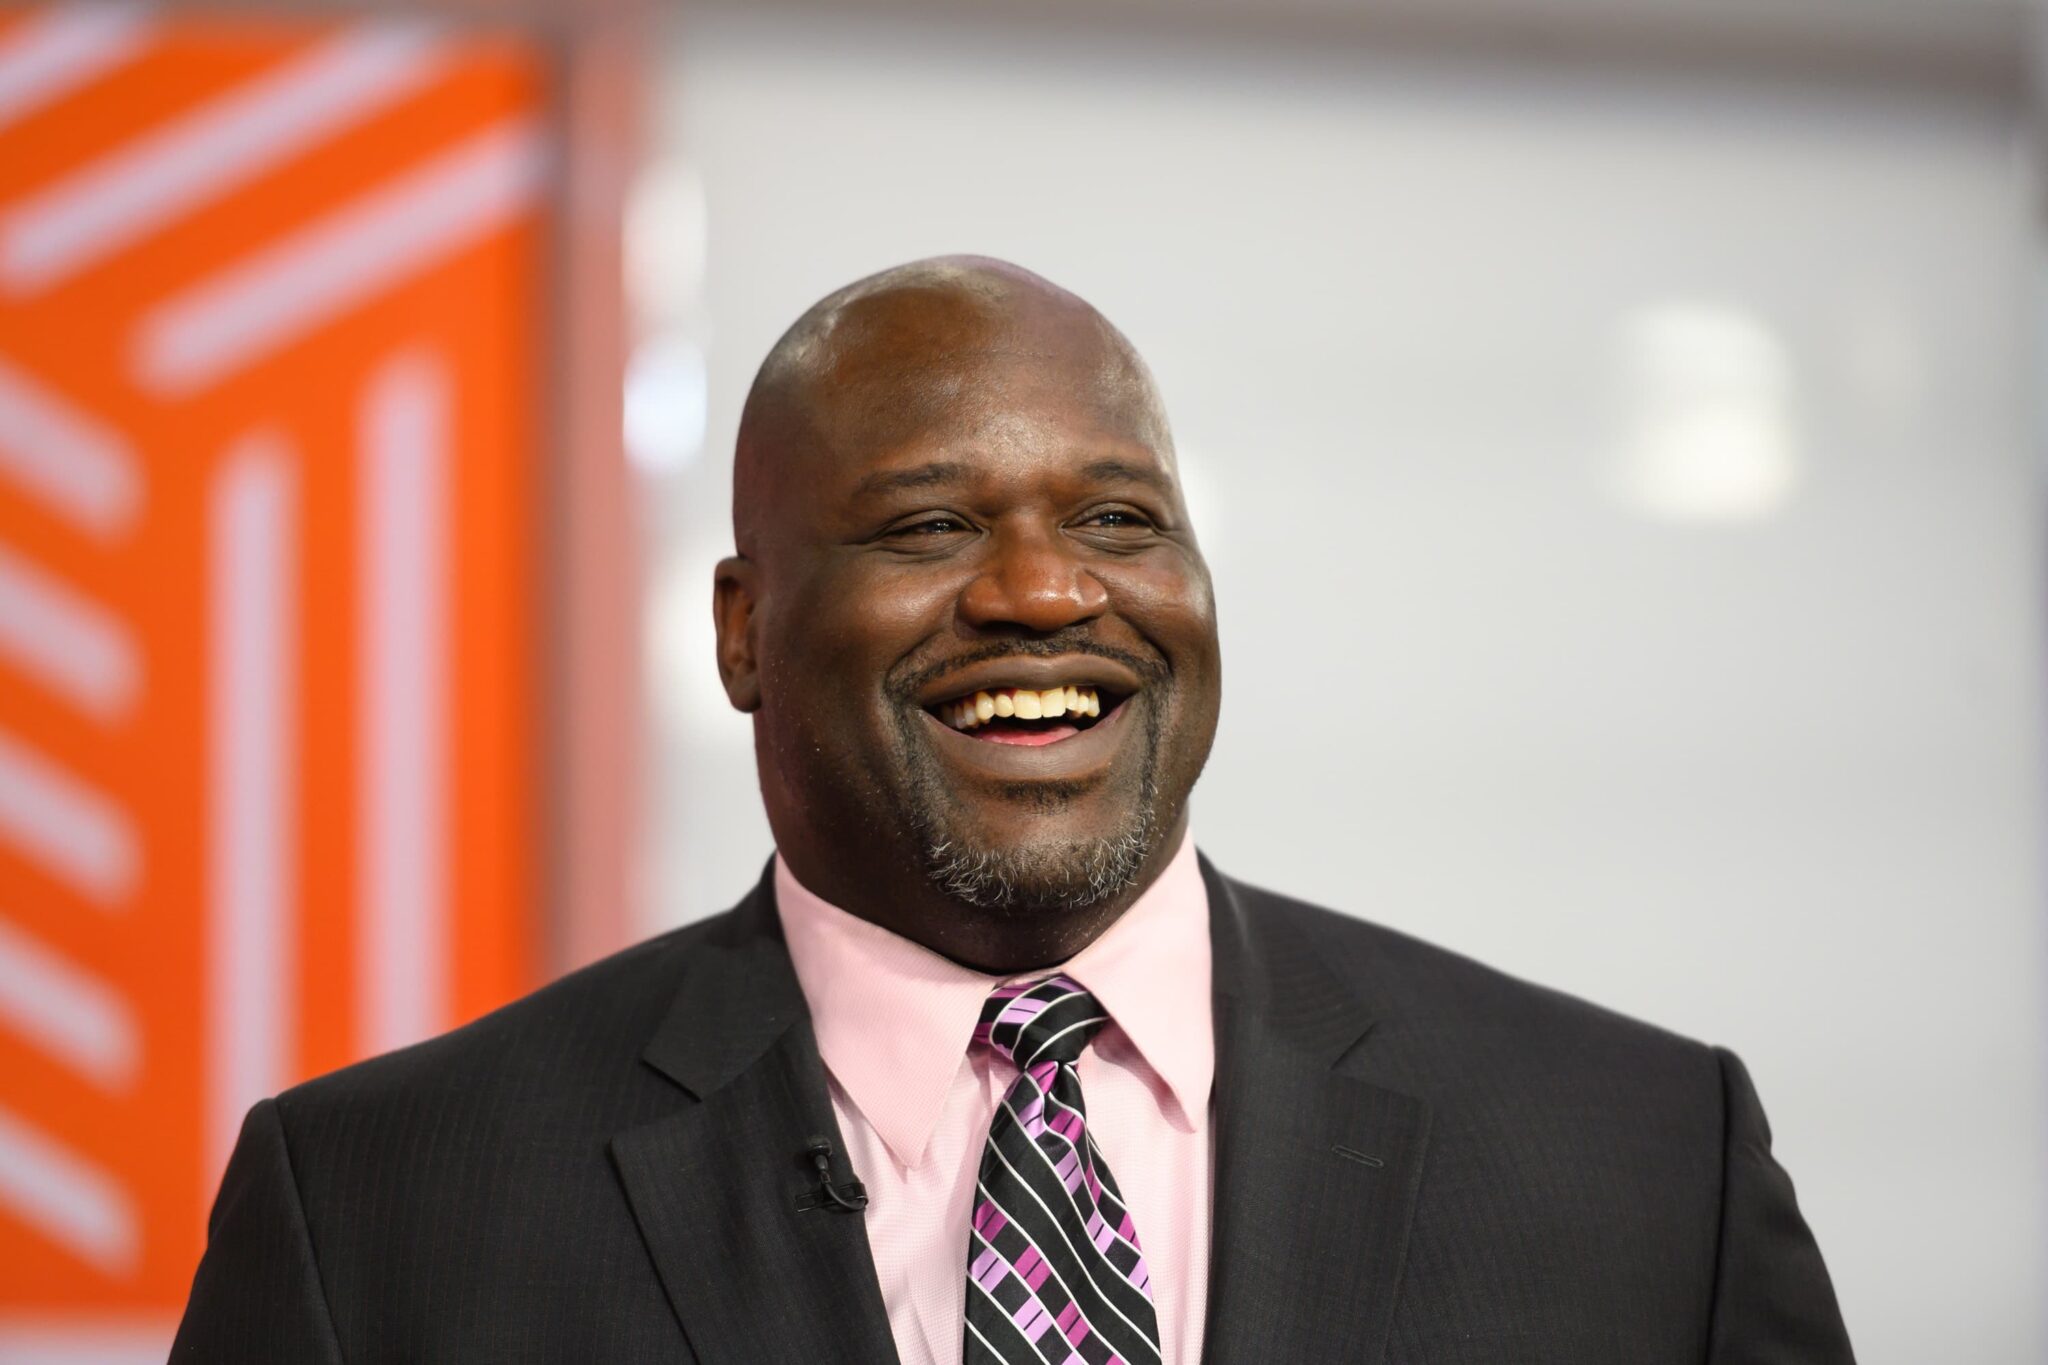 What is Shaq's 2022 net worth according to Forbes magazine?